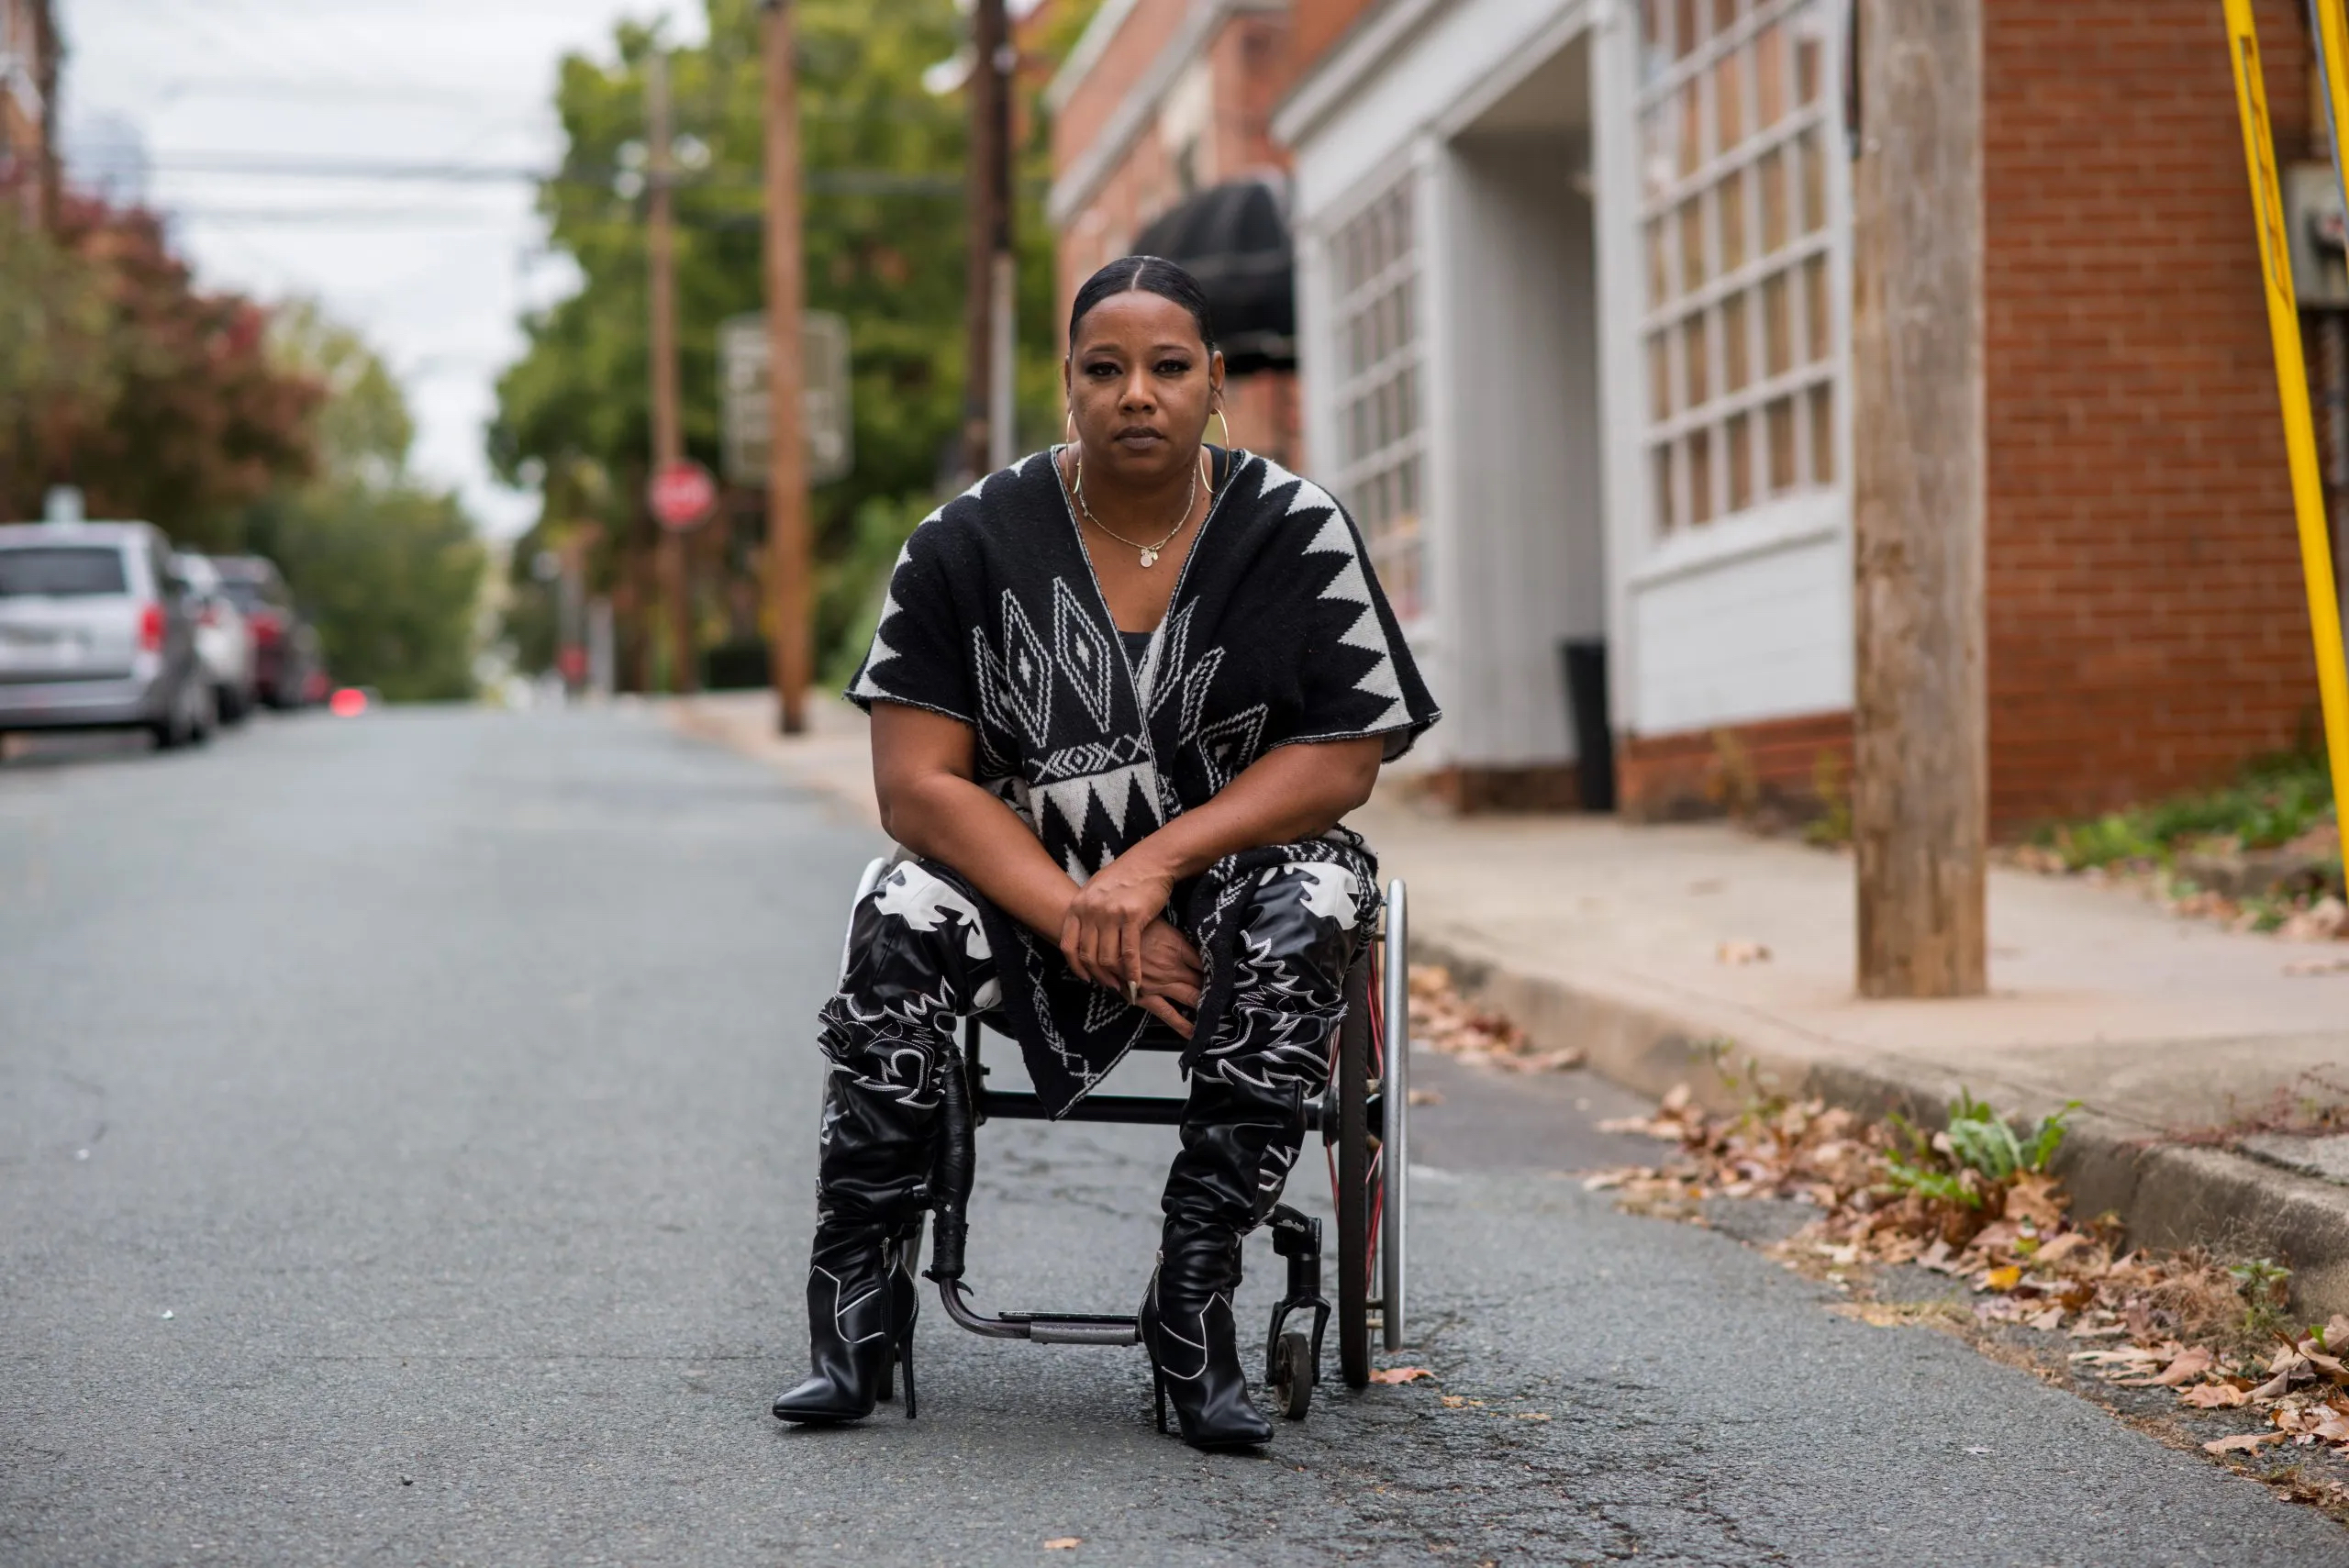 A woman looks at camera, in middle of street with brick buildings to side, in wheelchair